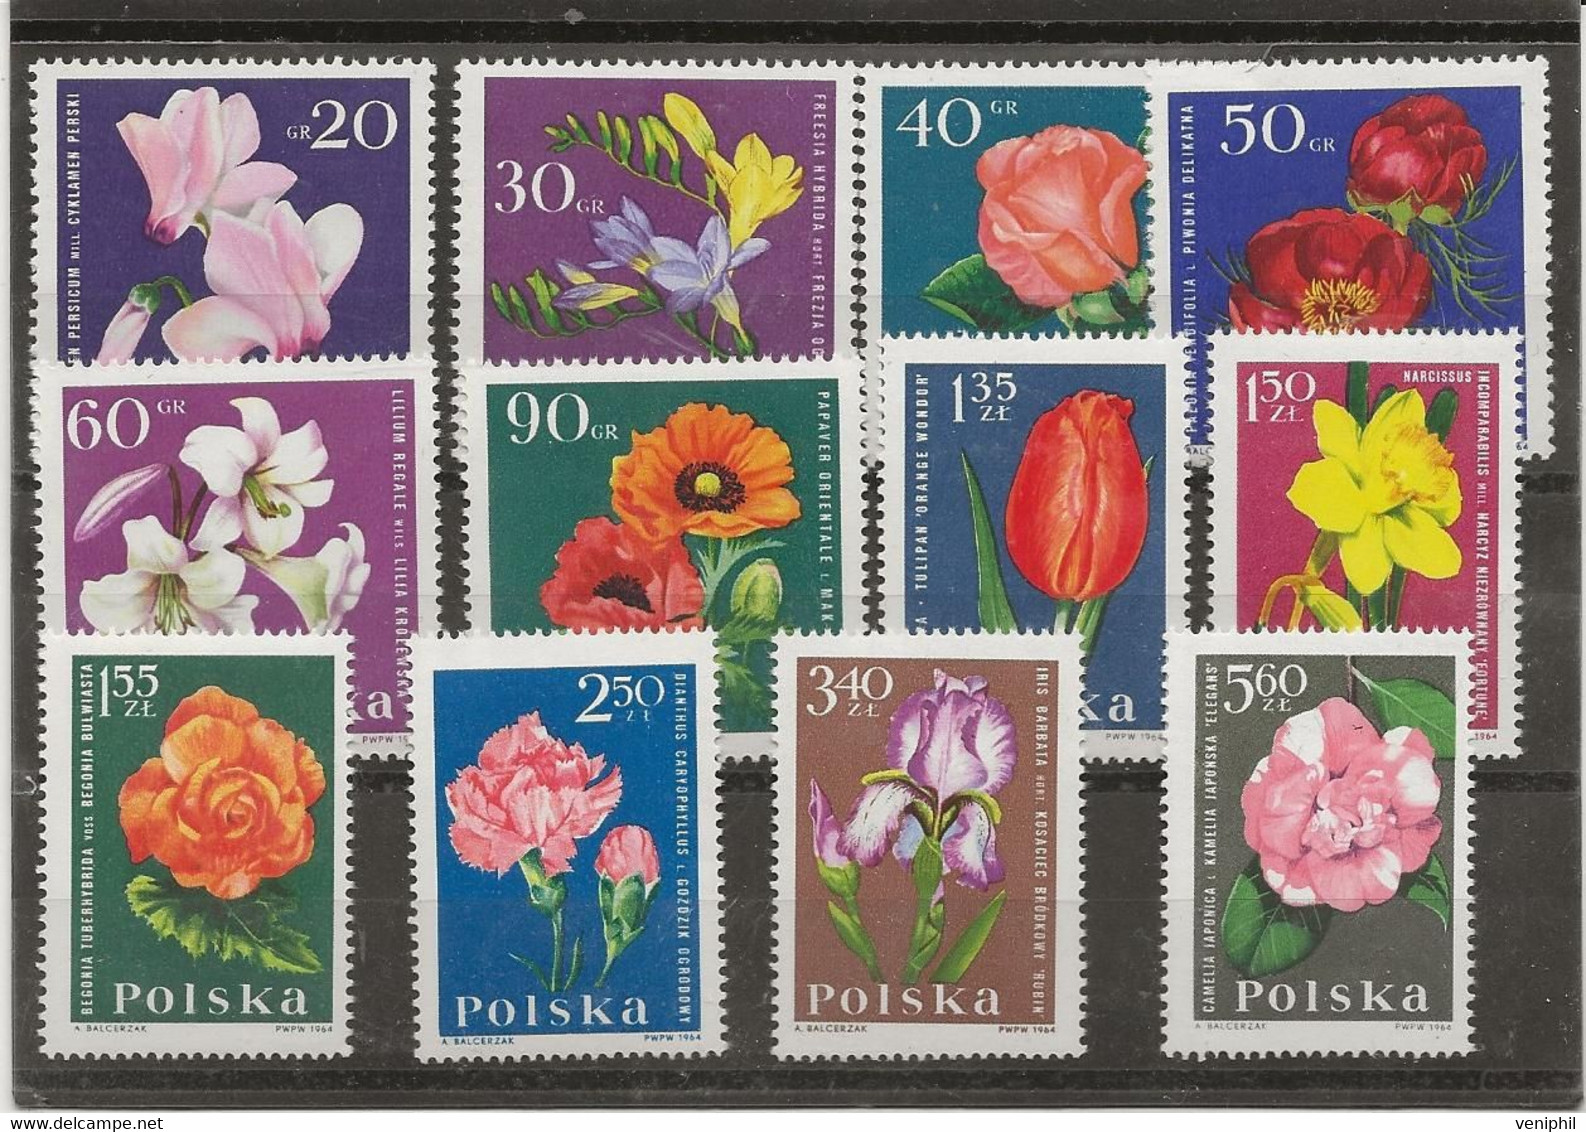 POLOGNE - FLEURS - N° 1394 A 1405 - NEUF SANS CHARNIERE. - COTE : 8 ,00 € - ANNEE 1964 - Unused Stamps